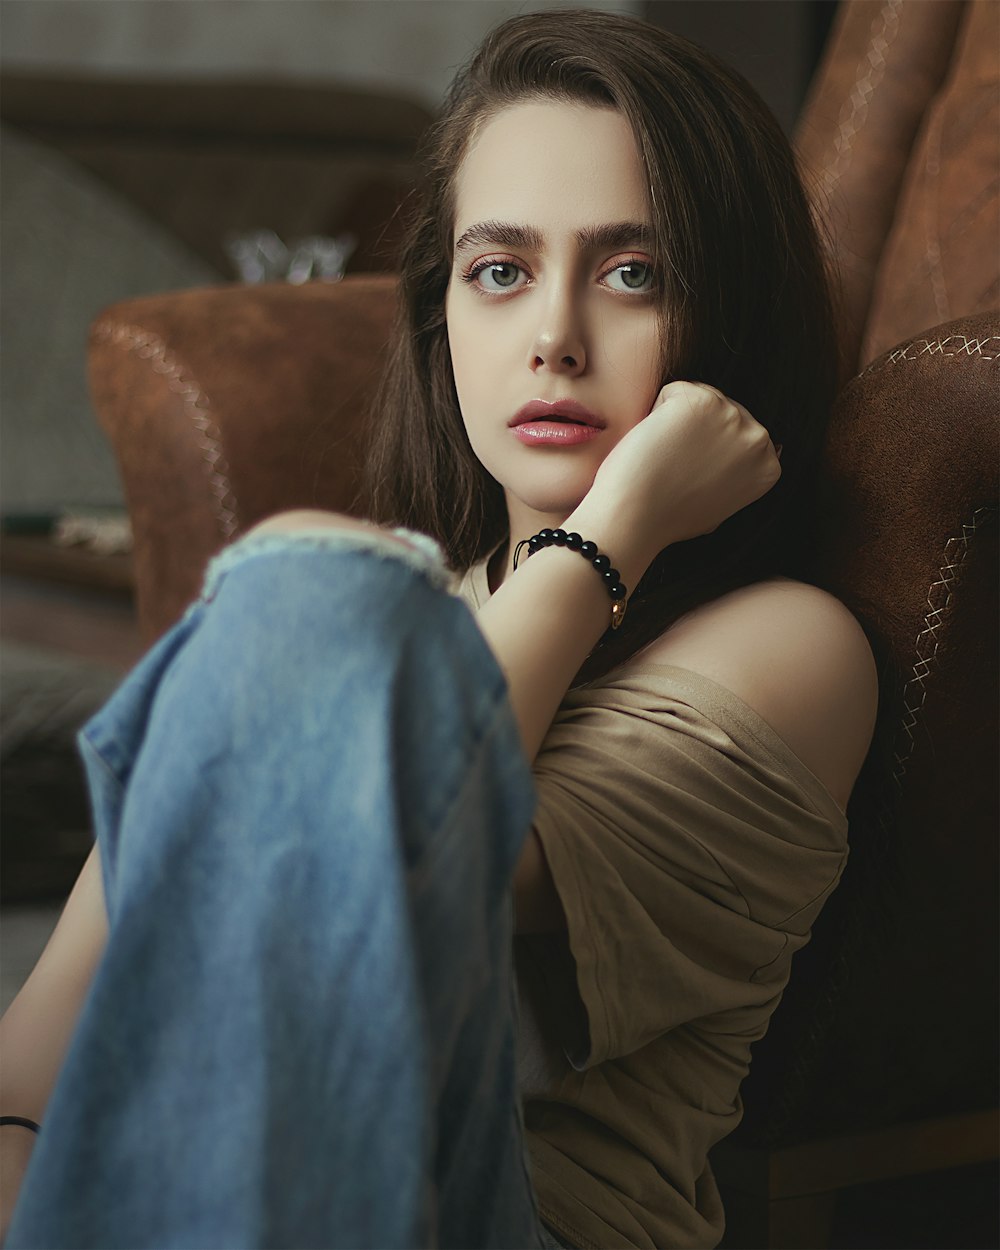 woman in black tank top and blue denim jeans sitting on brown leather couch